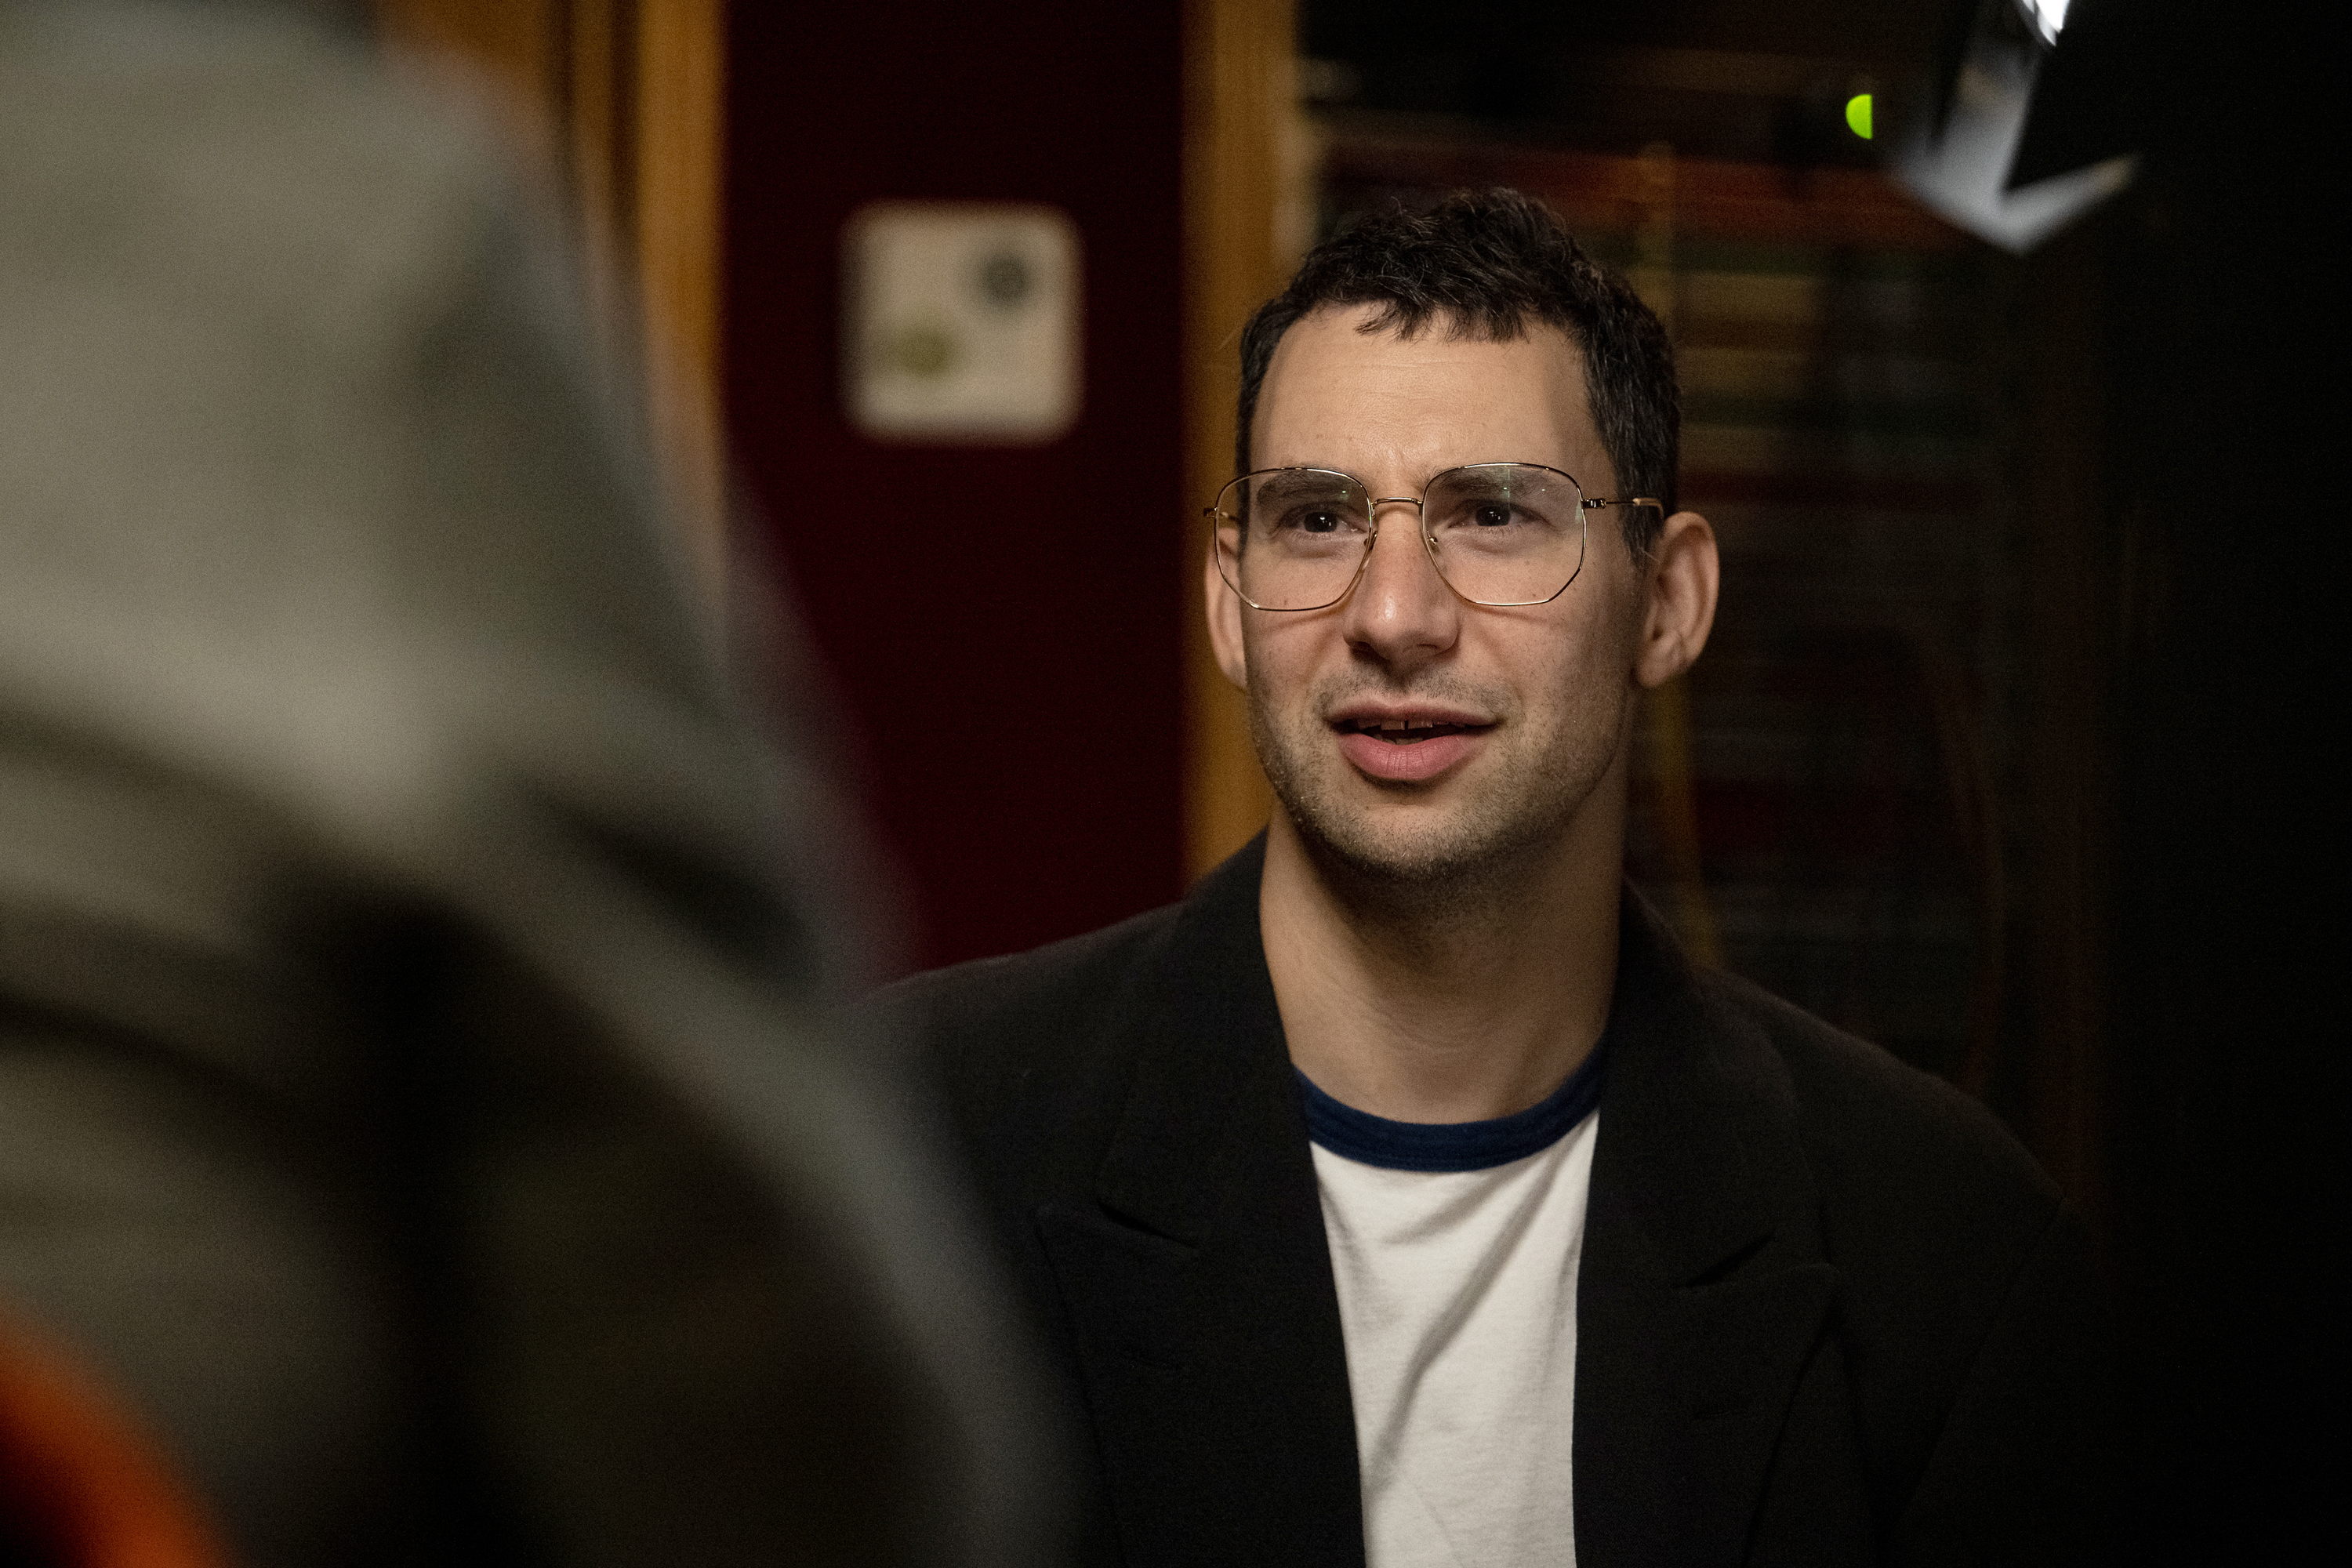 Jack in glasses and casual attire speaking with an out-of-focus person in the foreground